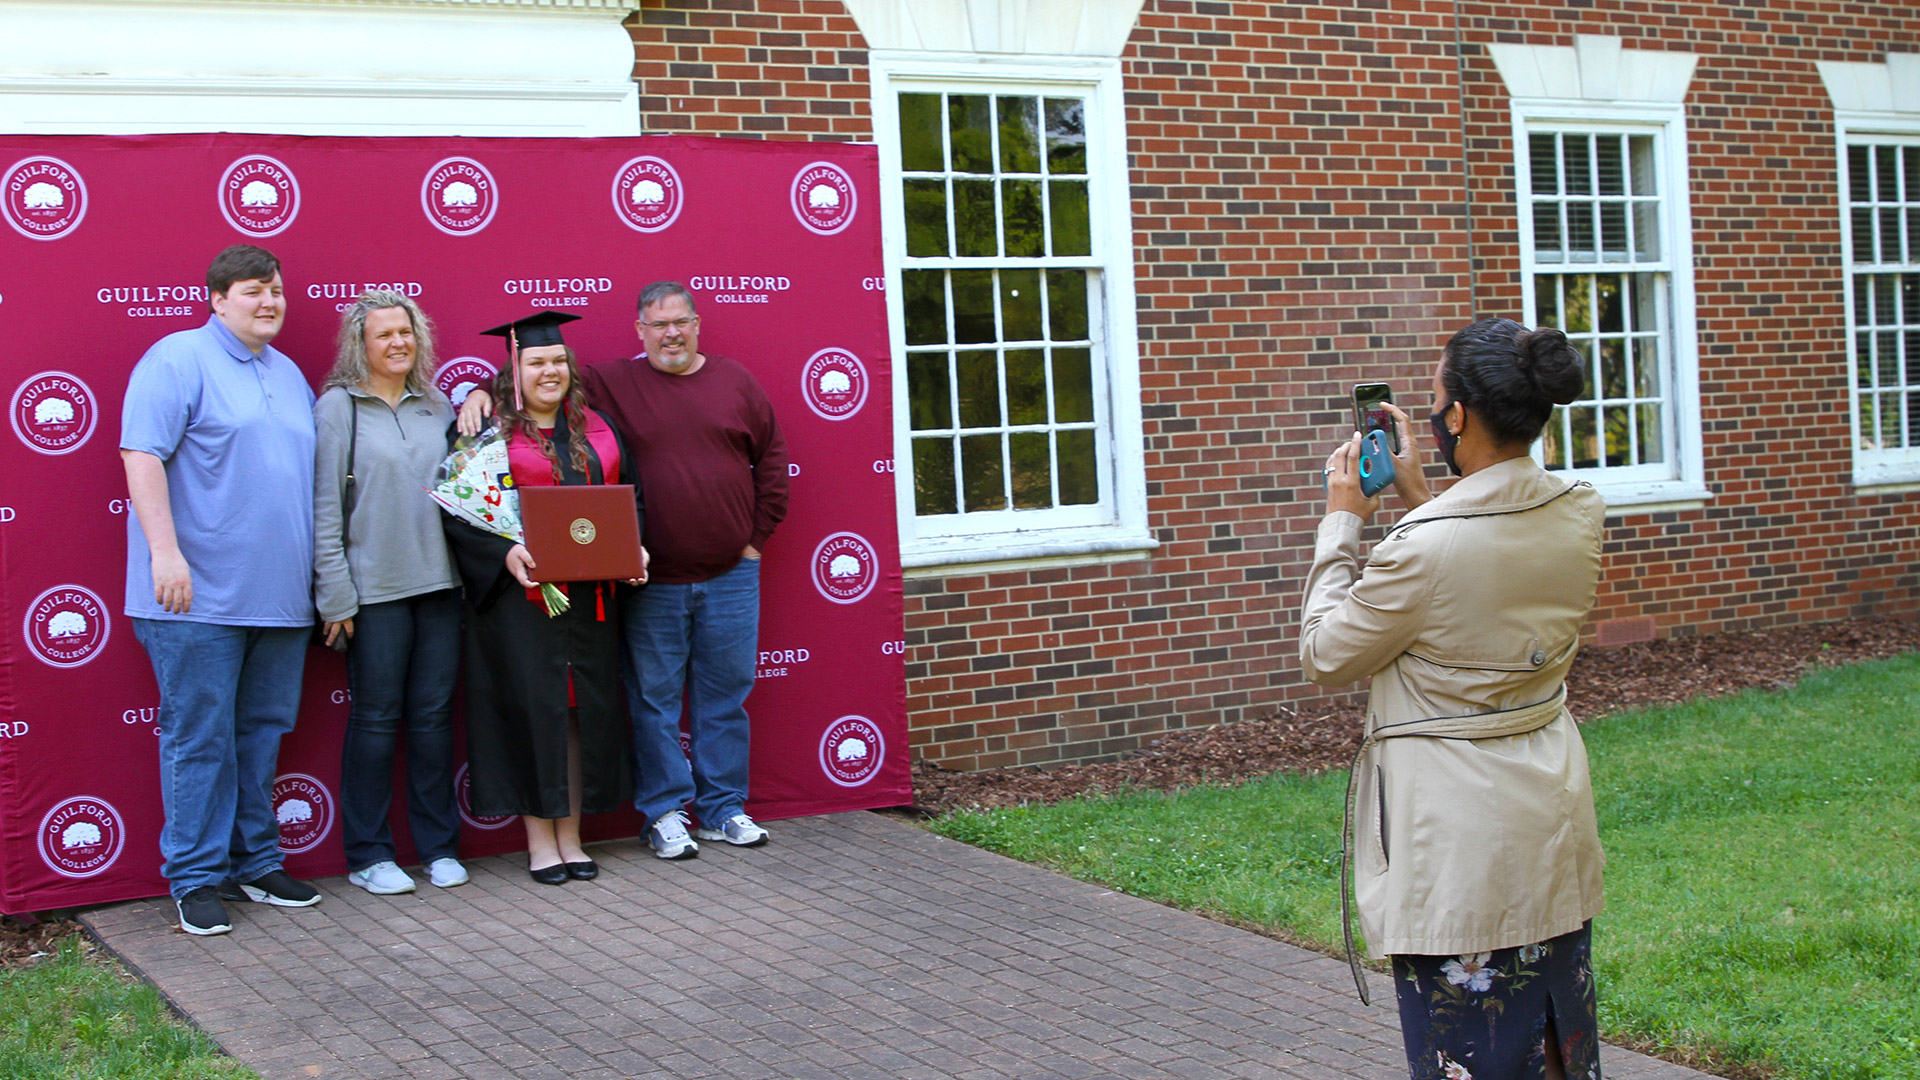 Staff member Stephanie Davis helps families get that perfect shot in front of a backdrop at Commencement 2021.